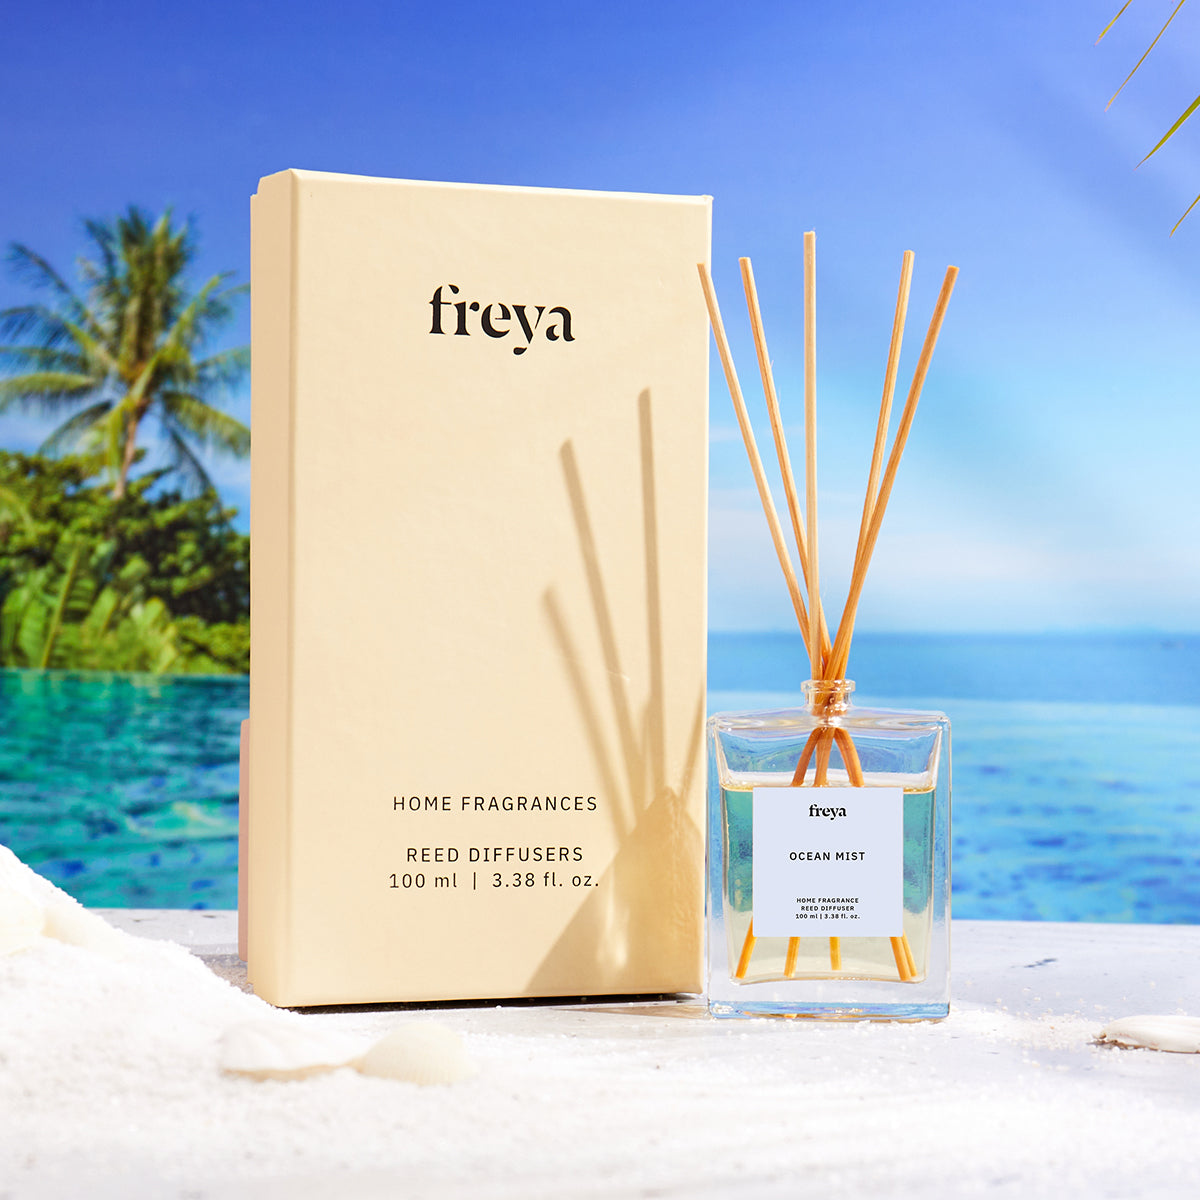 A popular home fragrance product that allows the aroma to diffuse continuously into the air throughout an entire room or area.  Create the right kind of feels around your home with our Fresh Ocean Mist Reed Diffuser. With the fragrances of white musk and oakmoss, this diffuser makes sure it creates a rejuvenating, fresh, and romantic atmosphere.